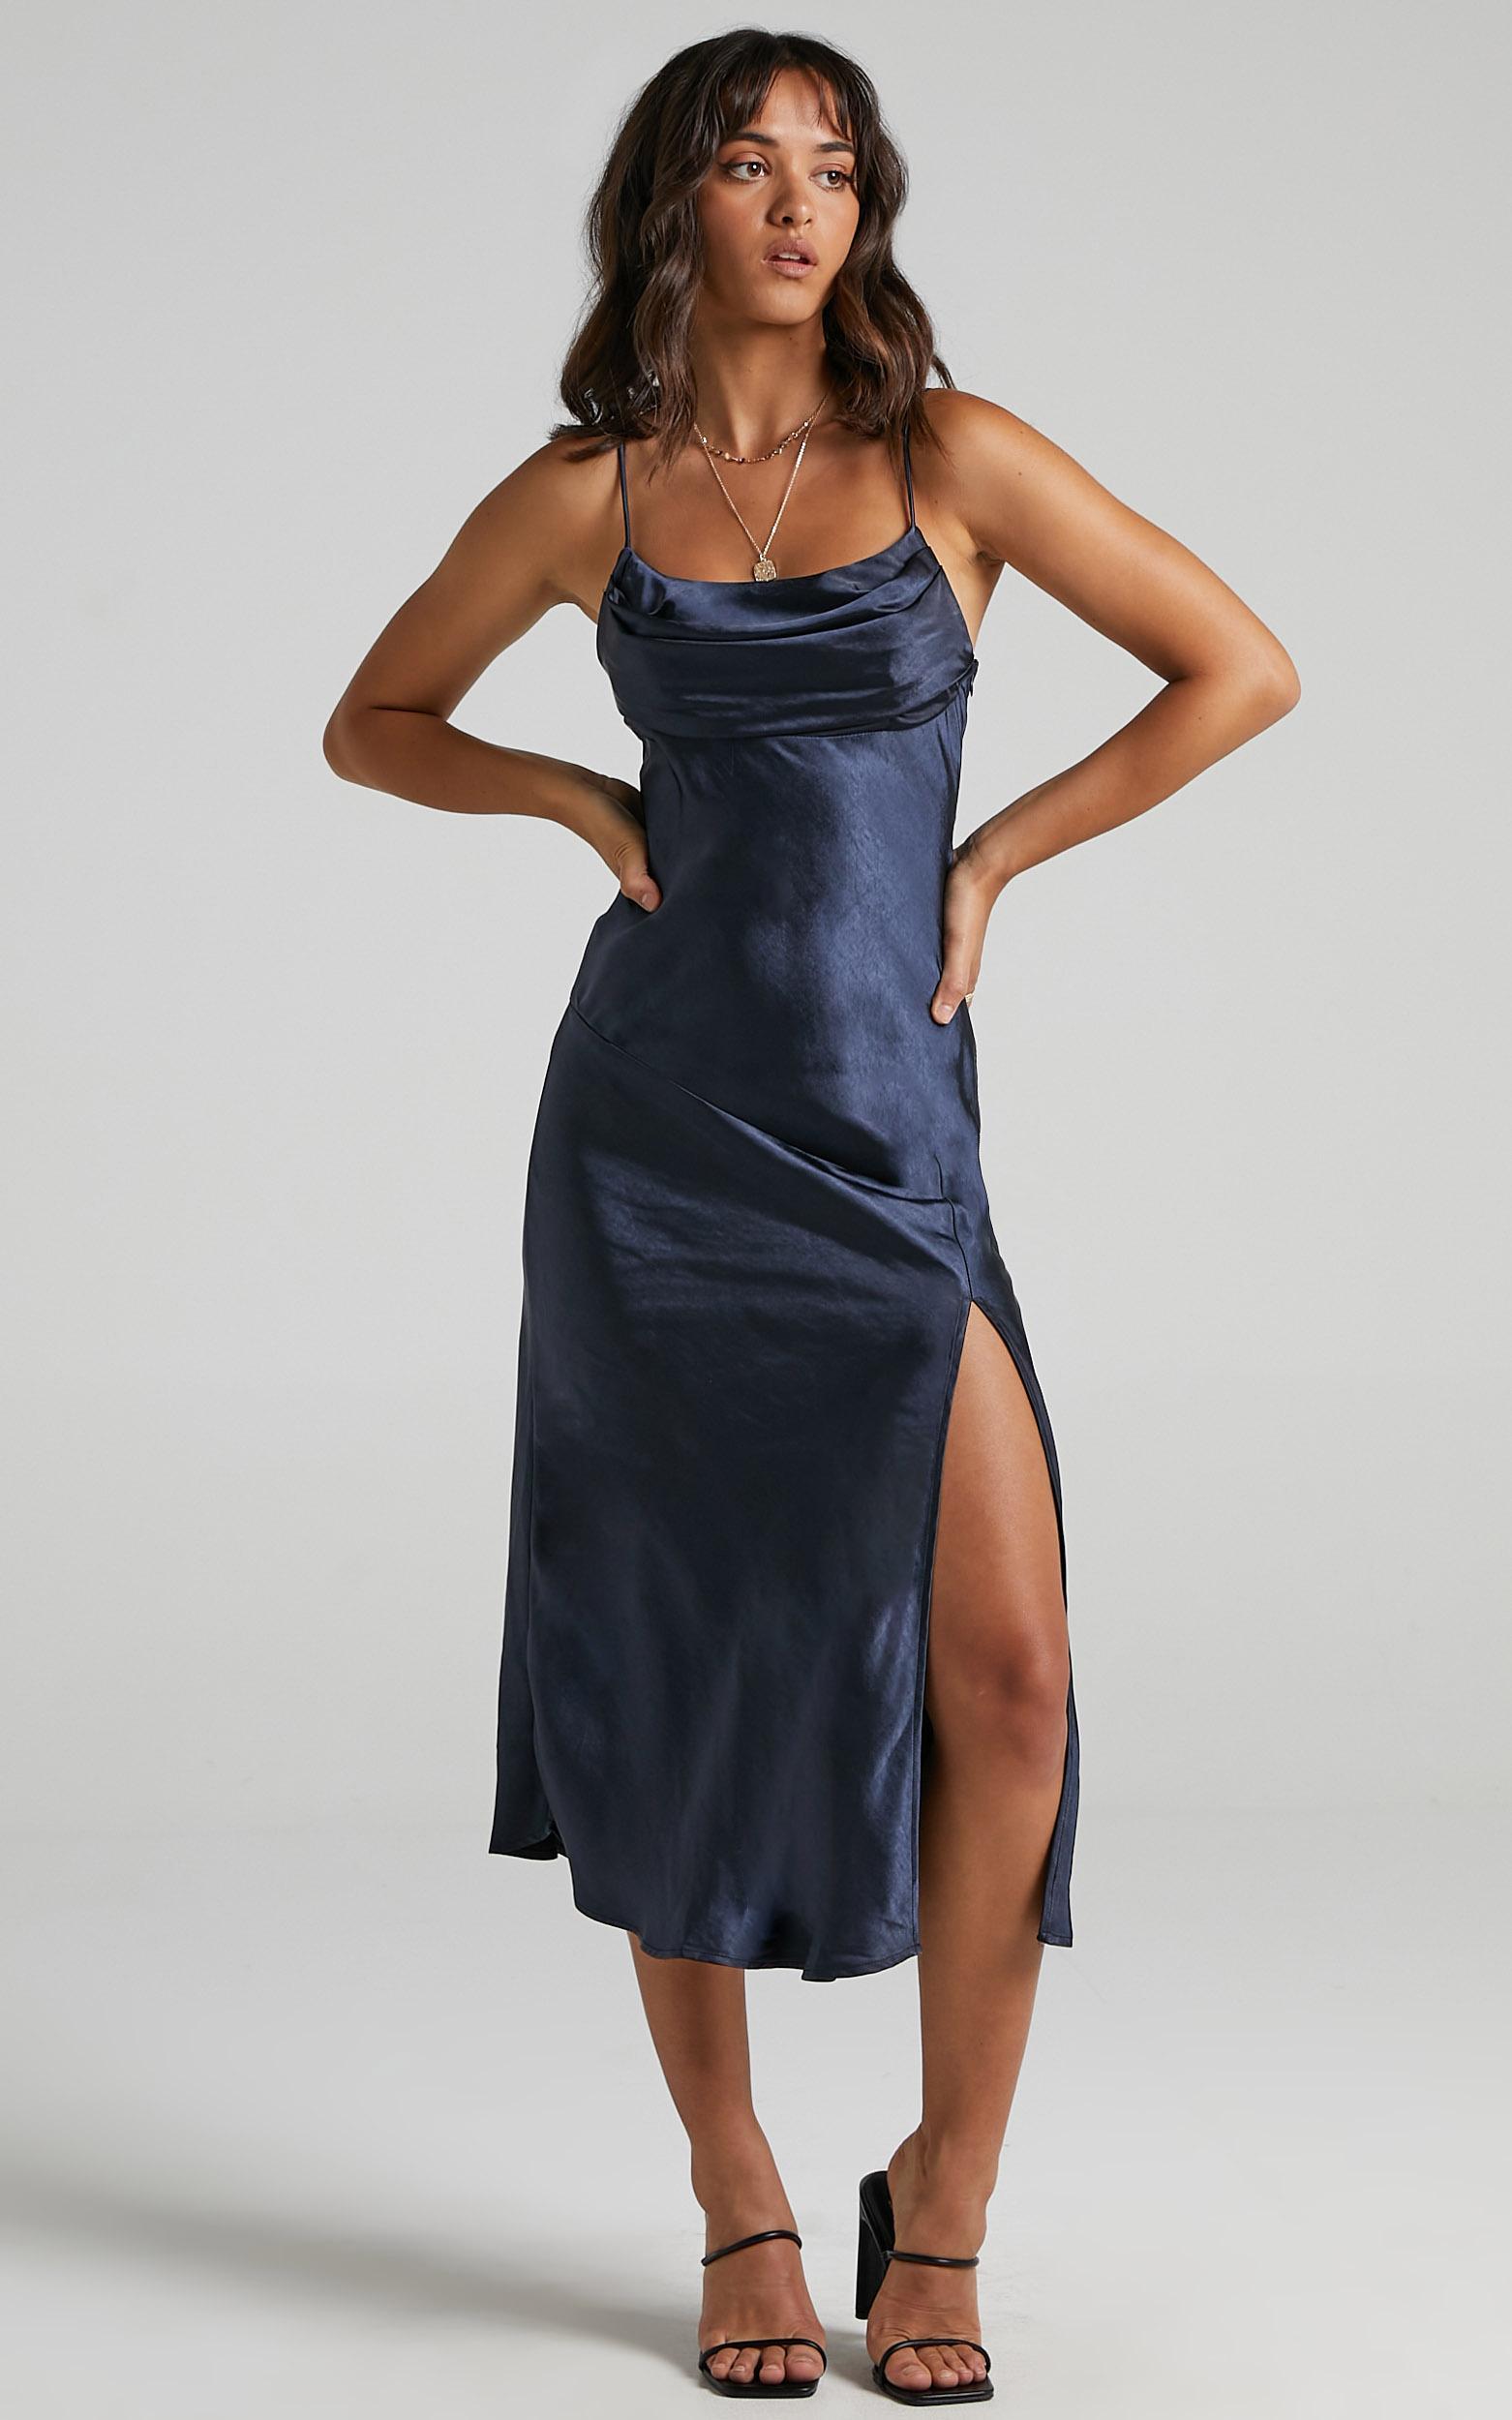 Monica Dress in Navy Satin - 06, NVY1, hi-res image number null